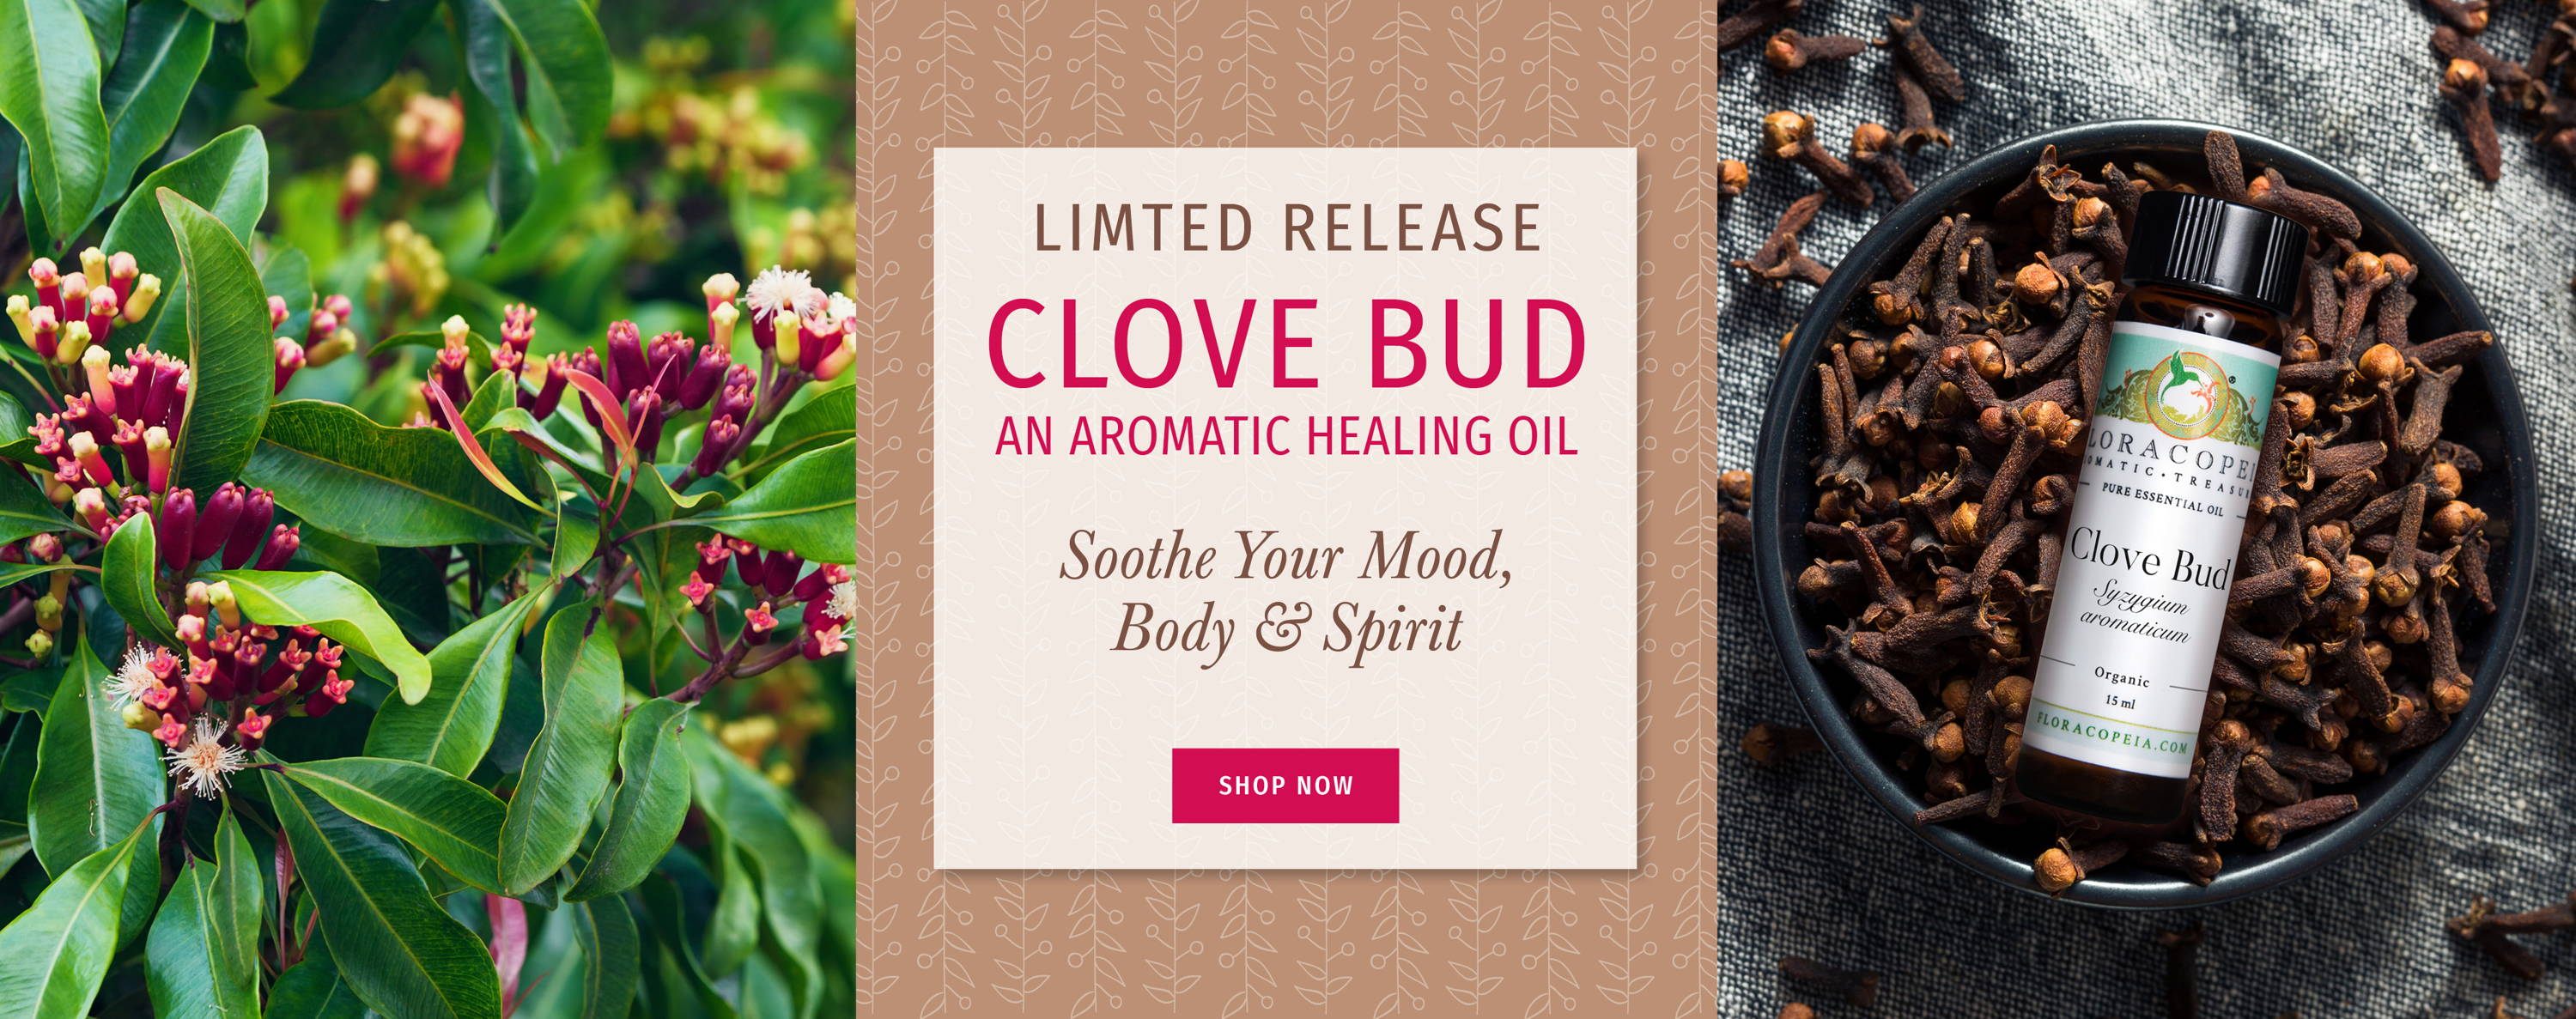 clove plant on left, bowl of cloves with essential oil bottle on the right, center brown with pink text limited release clove bud aromatic healing oil sooth your mood body and spirit shop now.